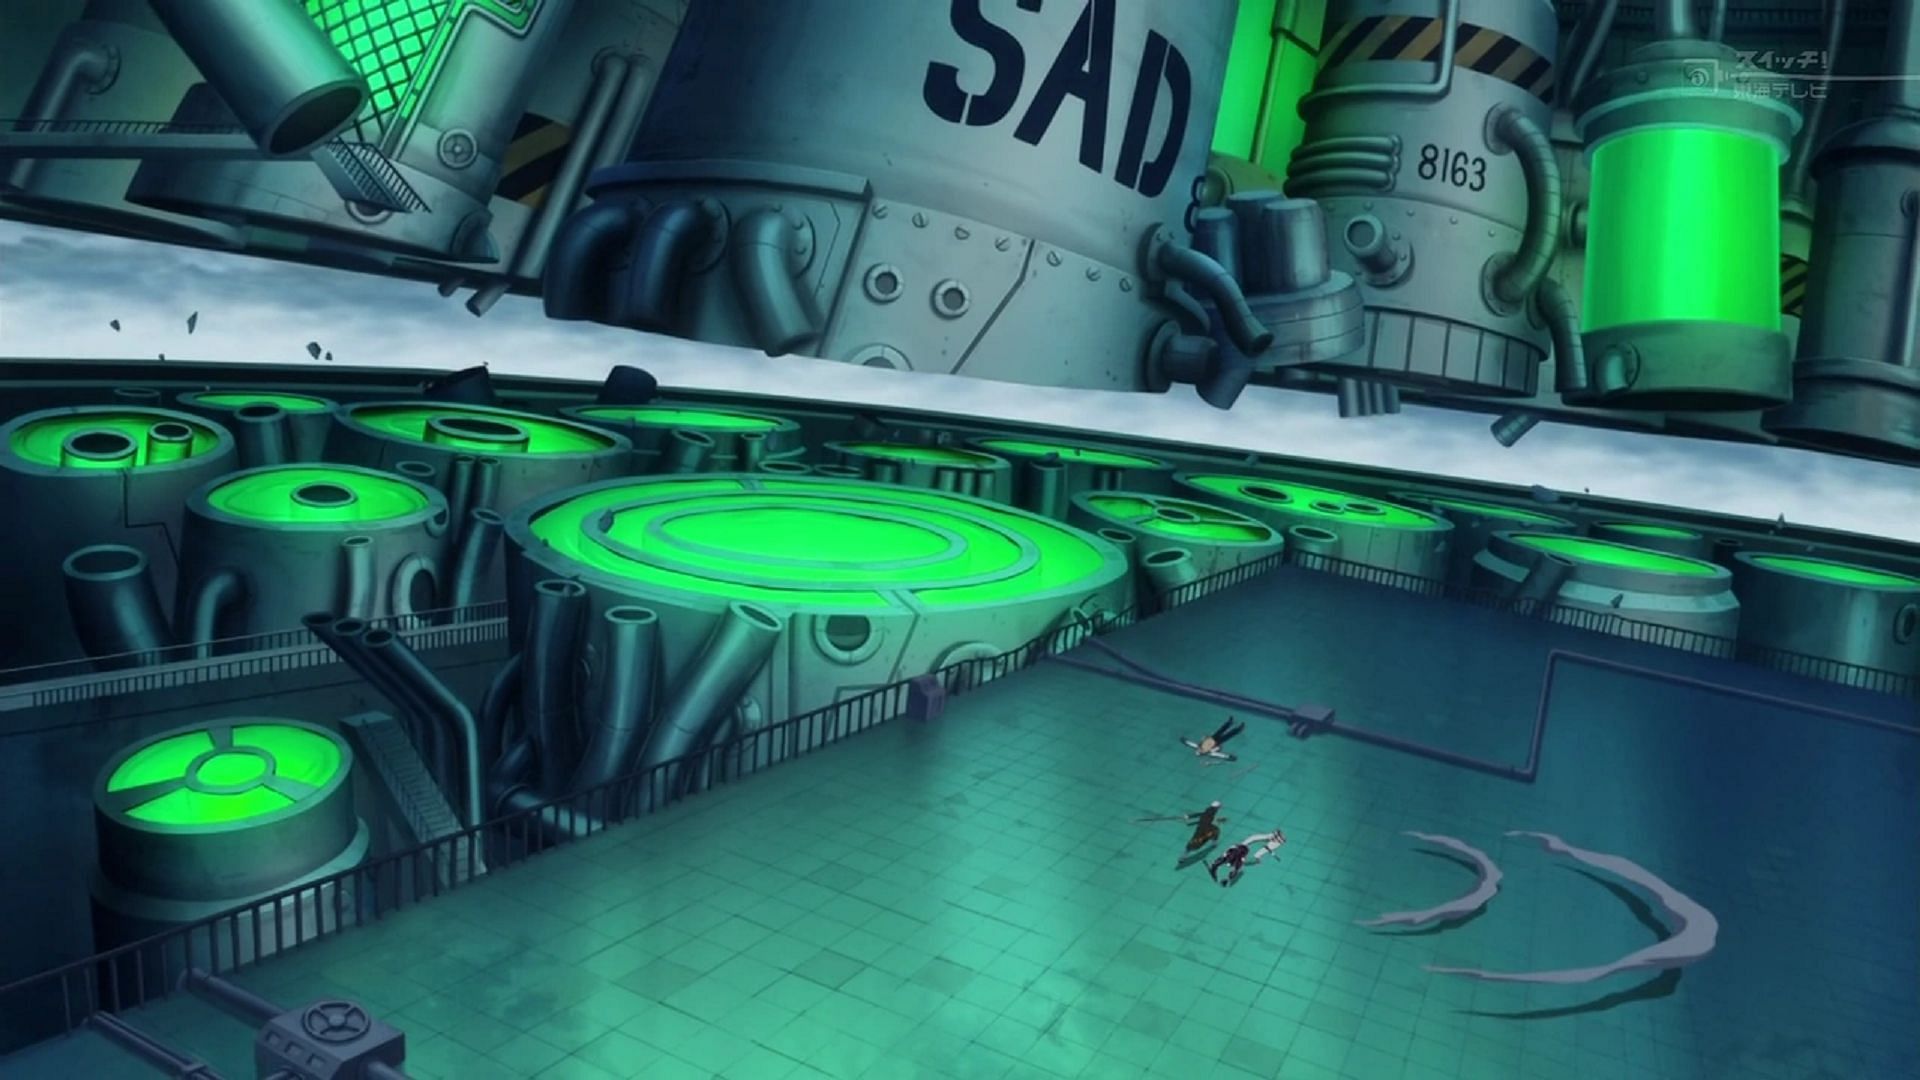 The SAD laboratory was cut in half by Law&#039;s final attack against Vergo (Image via Toei Animation, One Piece)